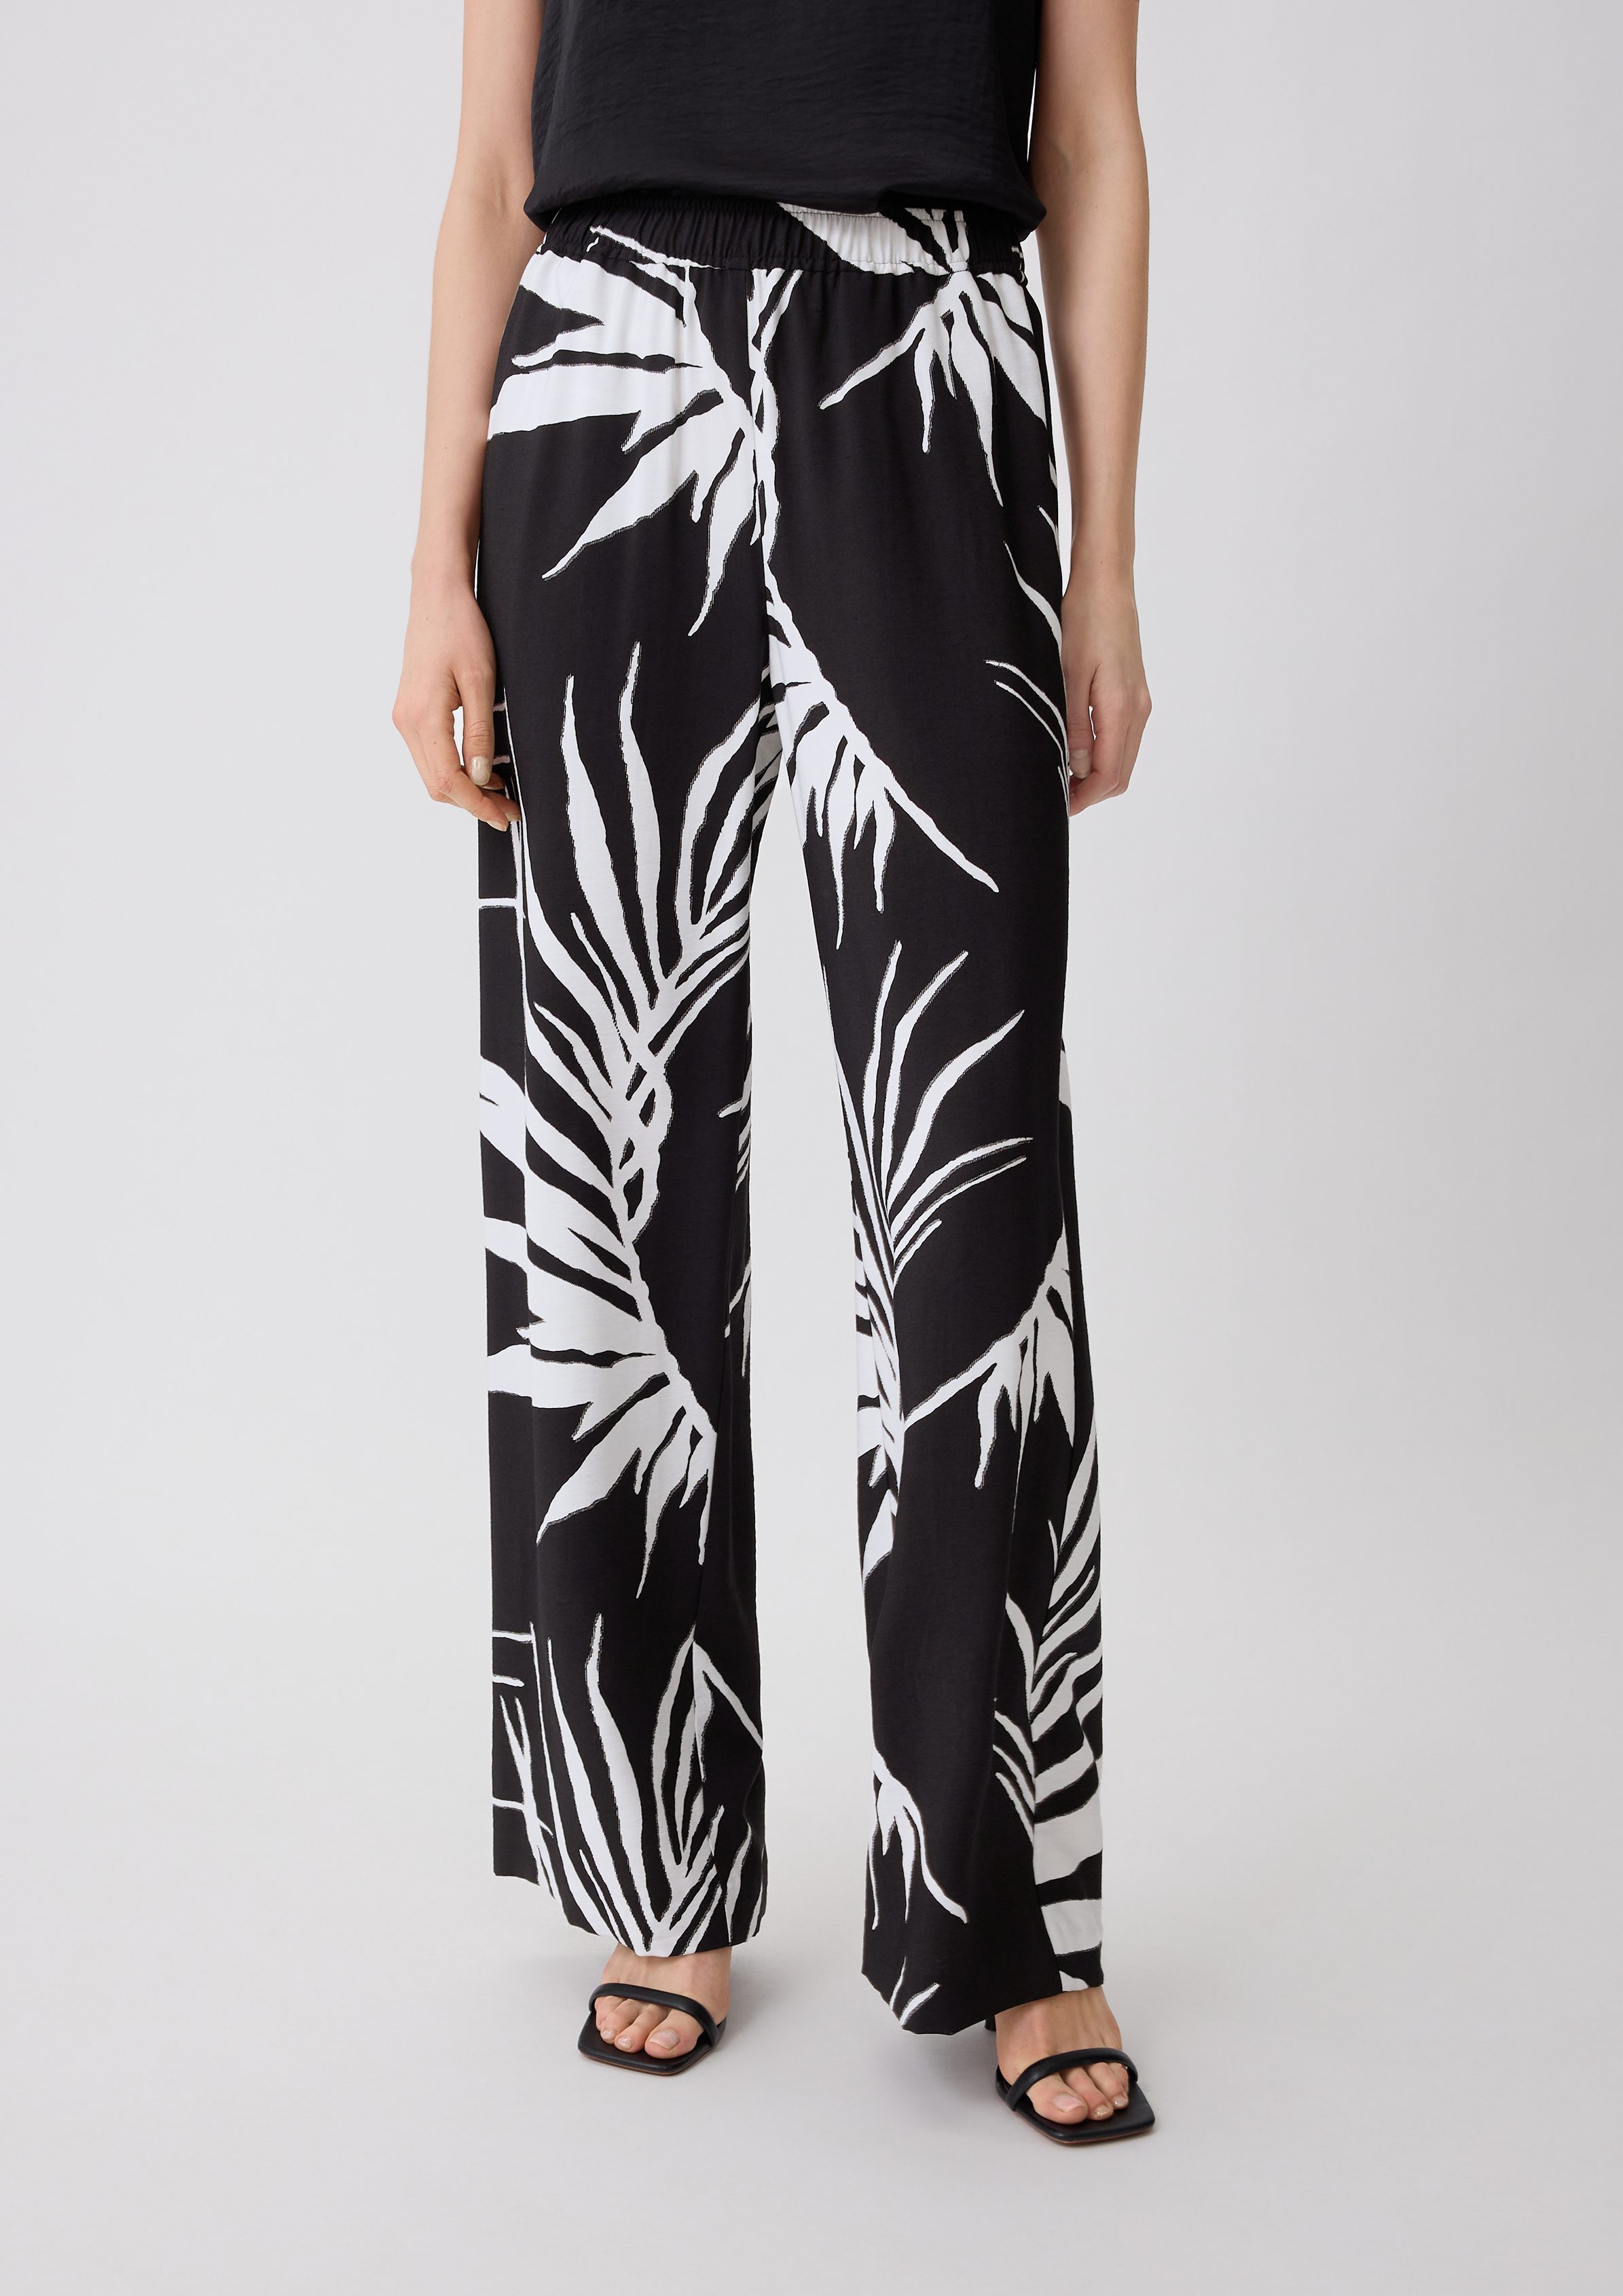 Comma Stoffhose Relaxed: Hose All-over-Print mit schwarz